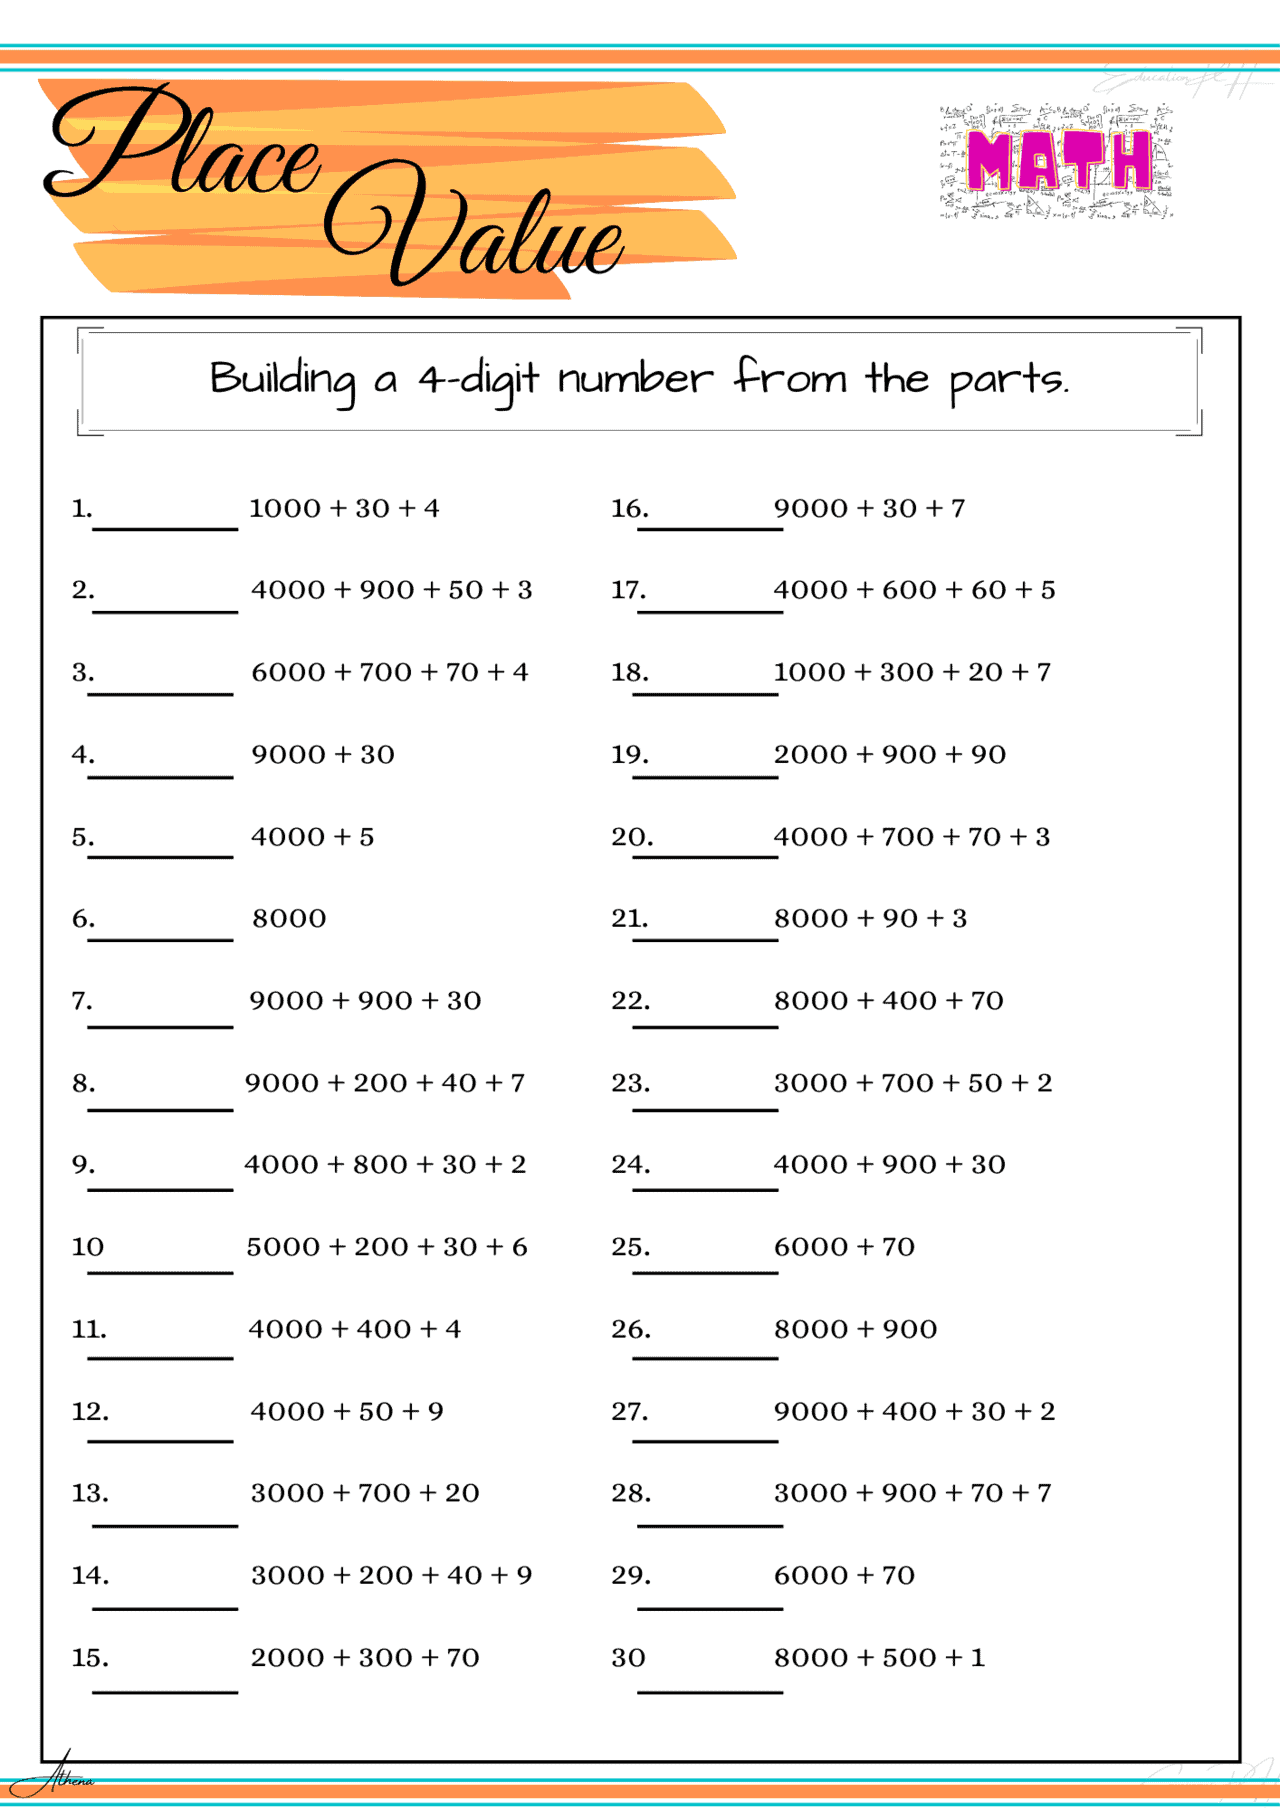 telling-time-worksheets-grade-4-to-the-nearest-minute-printable-math-time-worksheets-for-grade